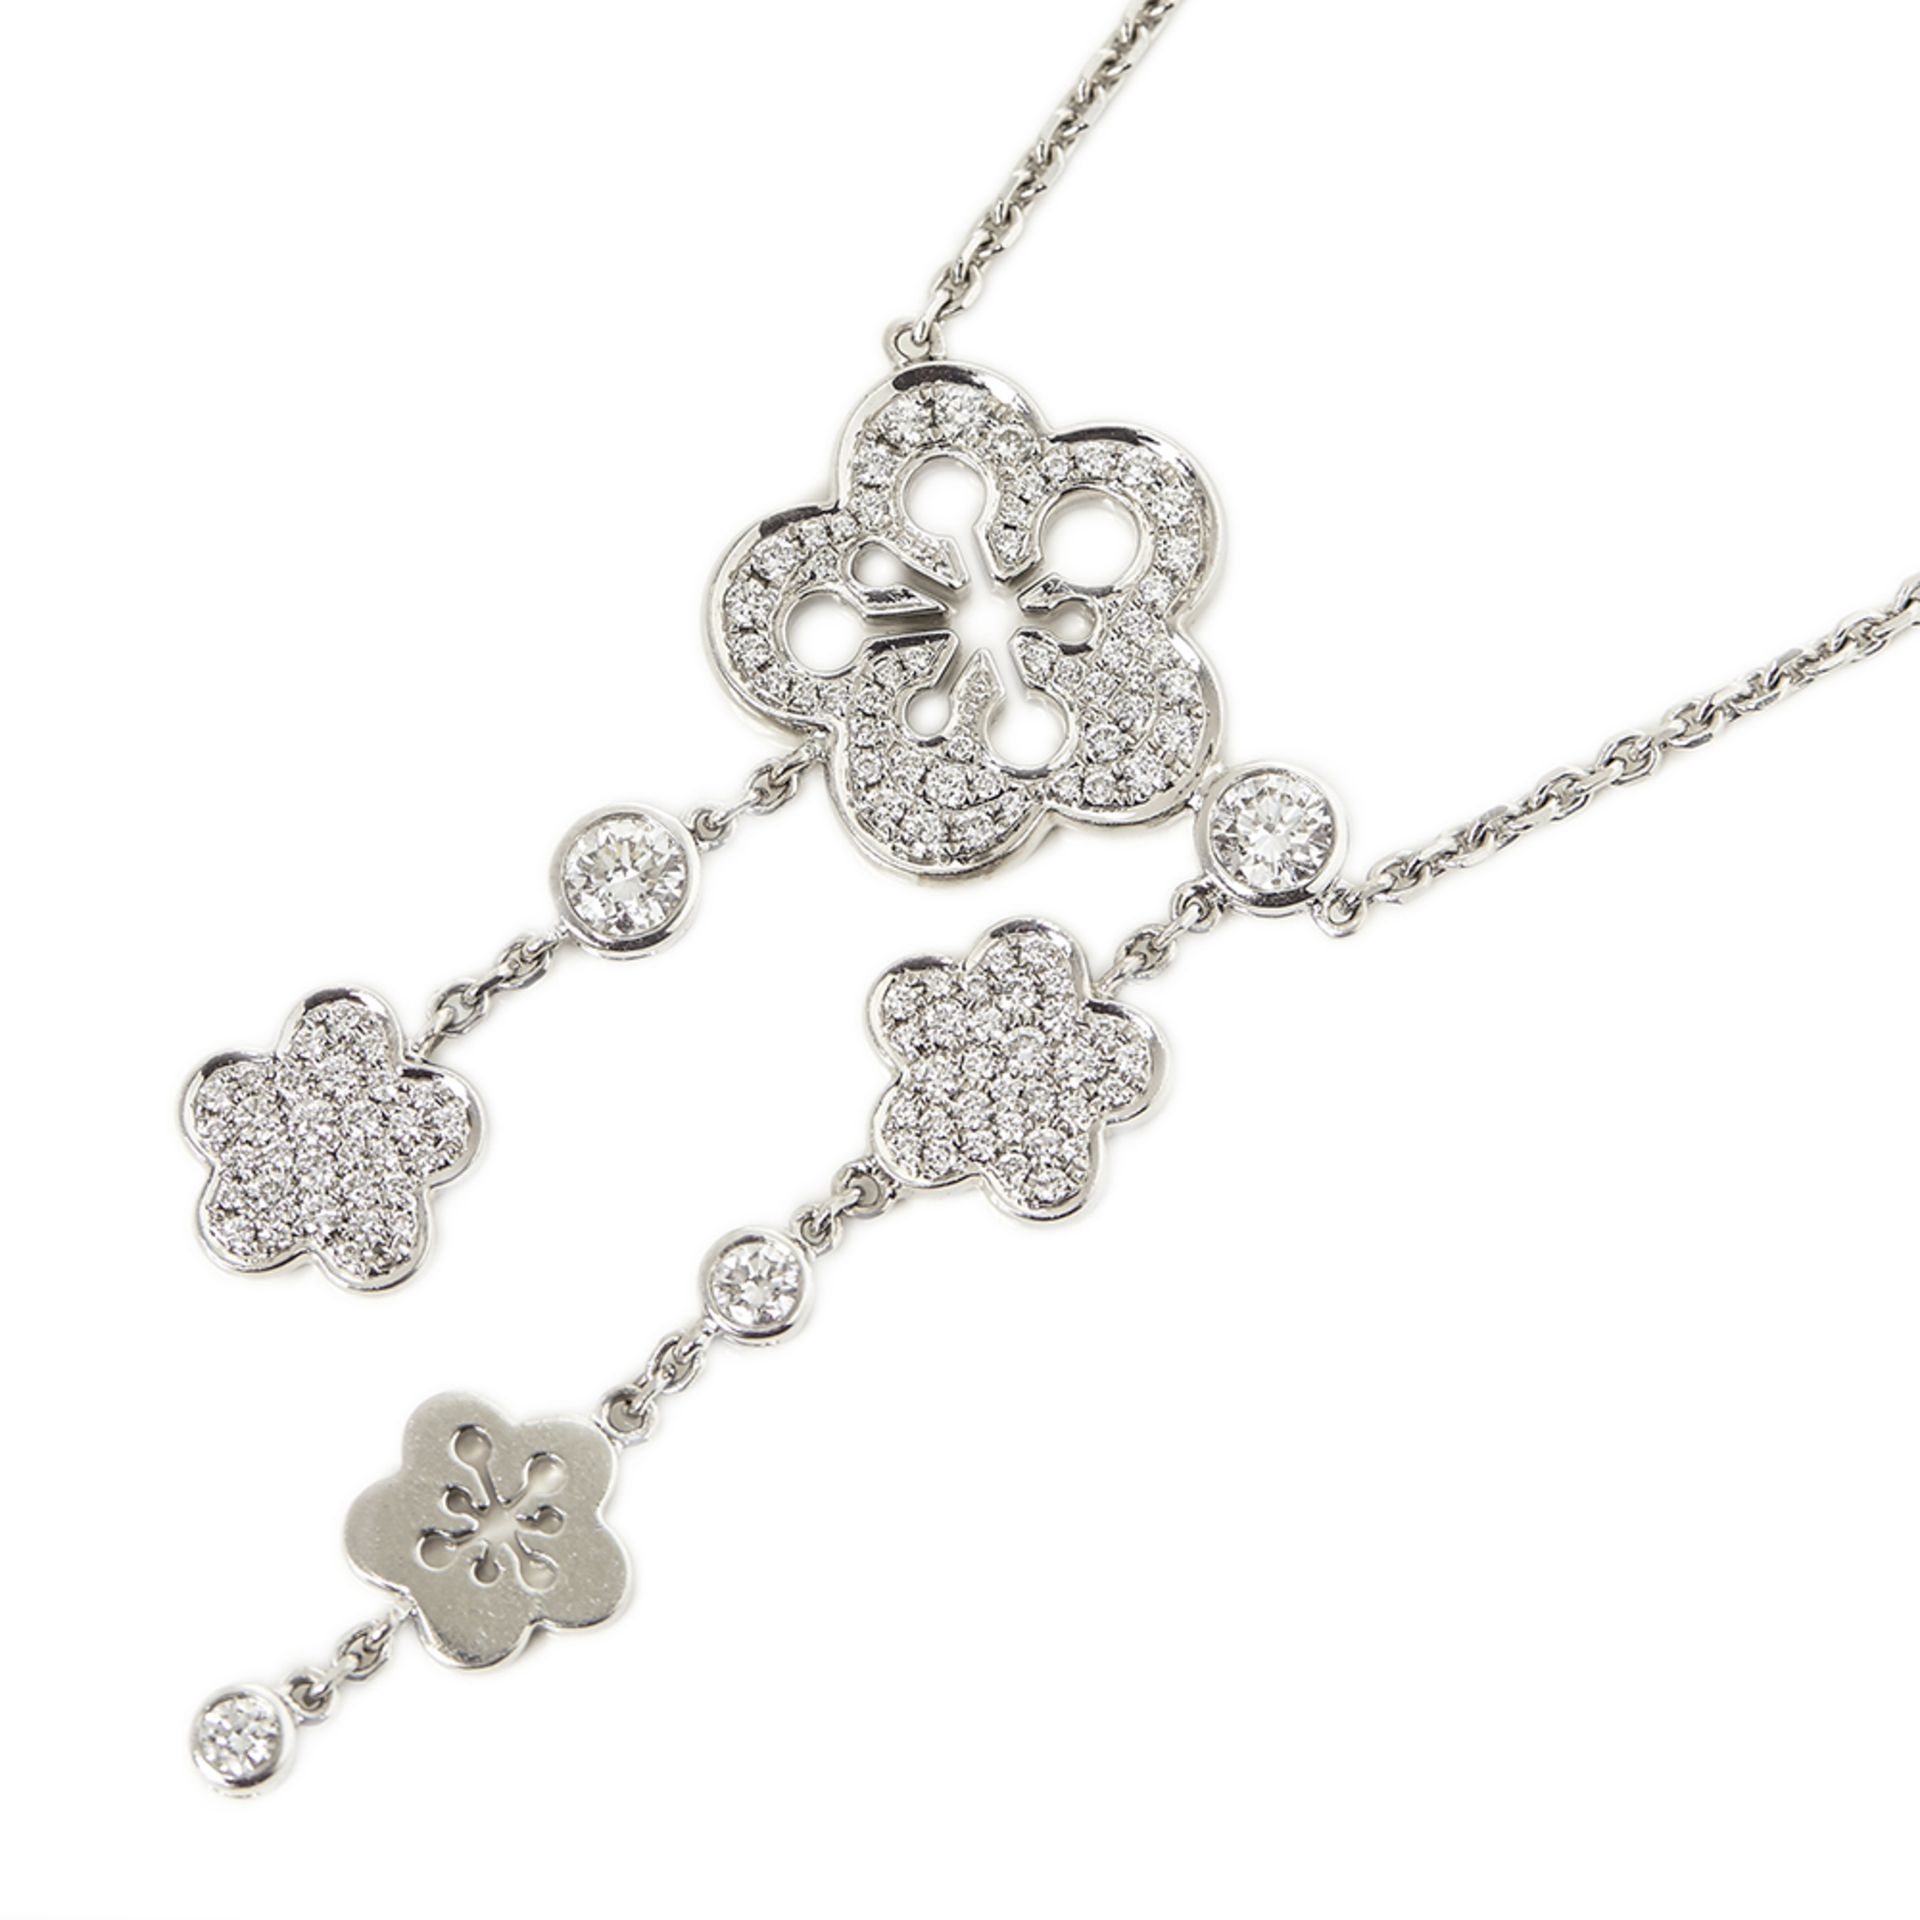 Boodles 18k White Gold Diamond Blossom Necklace - Image 2 of 9